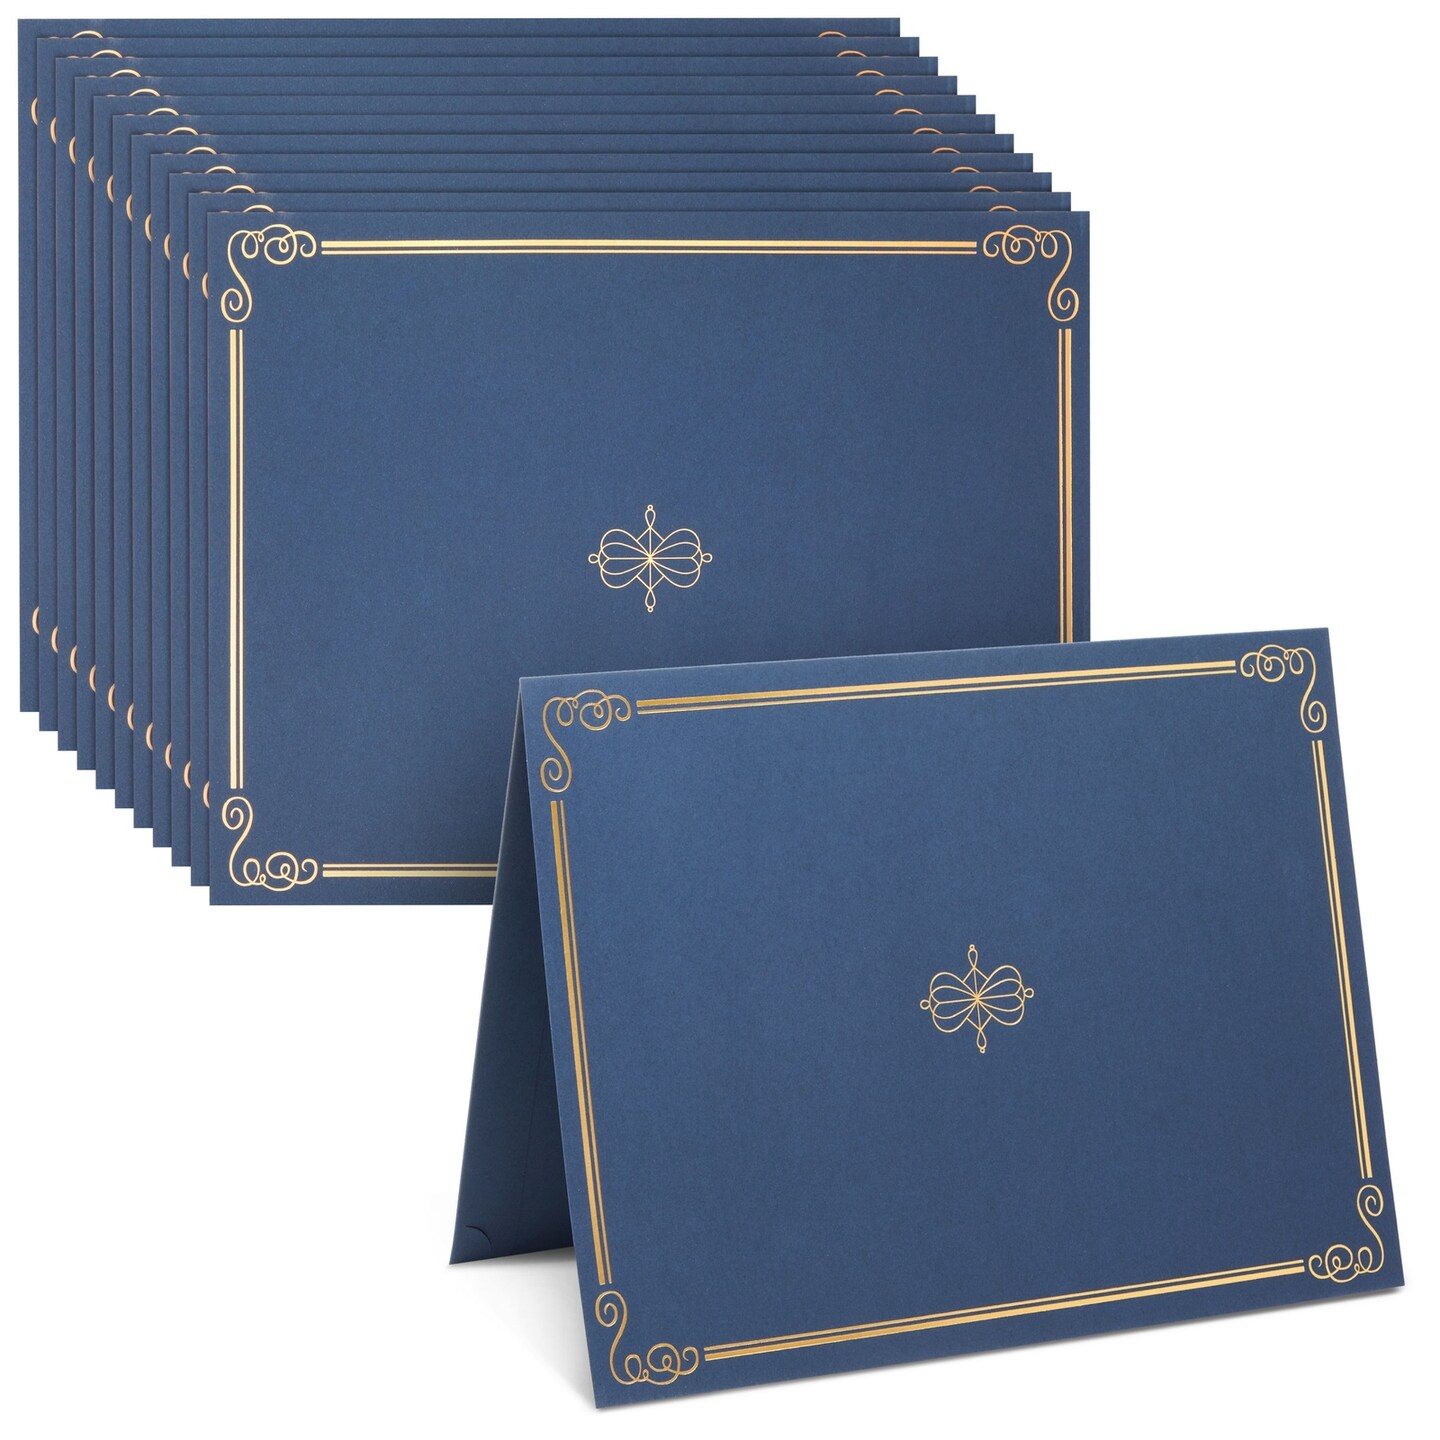 24-Pack Navy Blue Award Certificate Holders - Bulk Certificate Holders for Graduation, Diploma, Employee Appreciation, Certifications (fits 8.5x11)